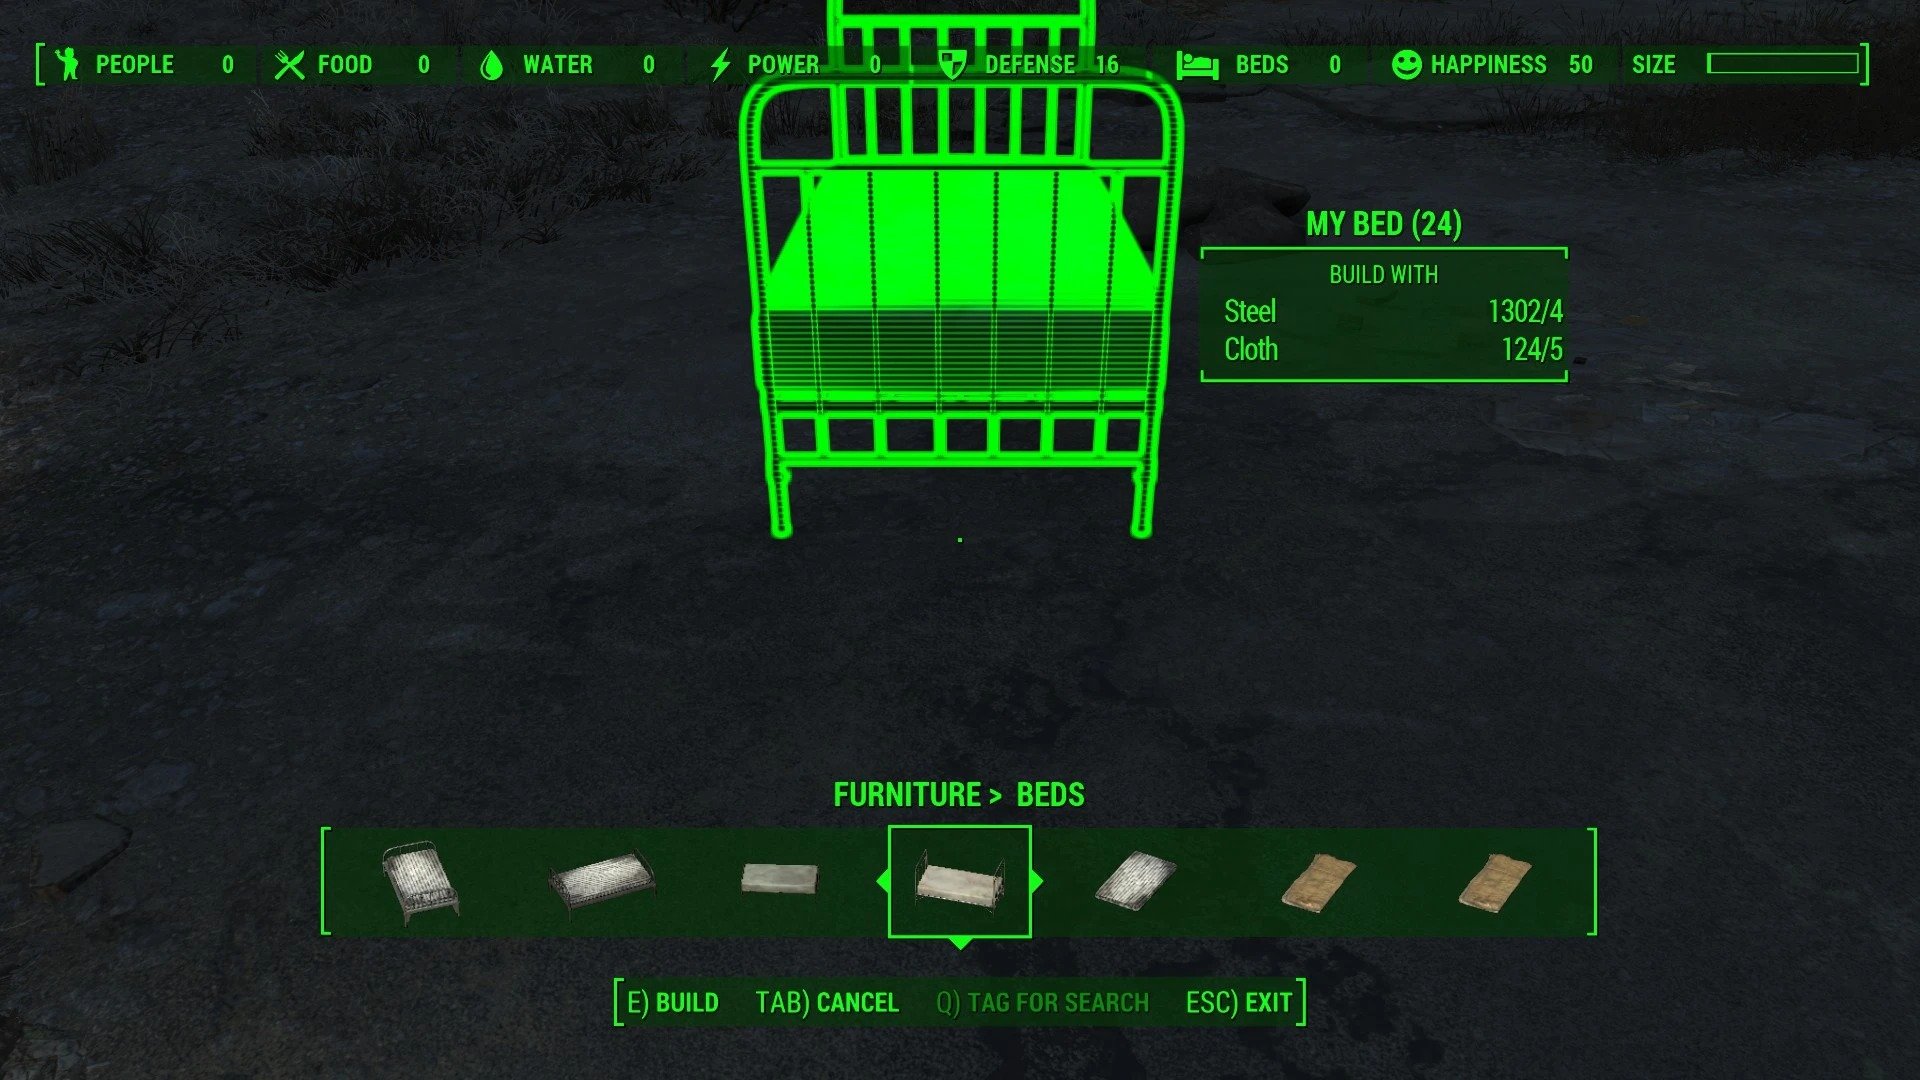 This is my bed fallout 4 (120) фото